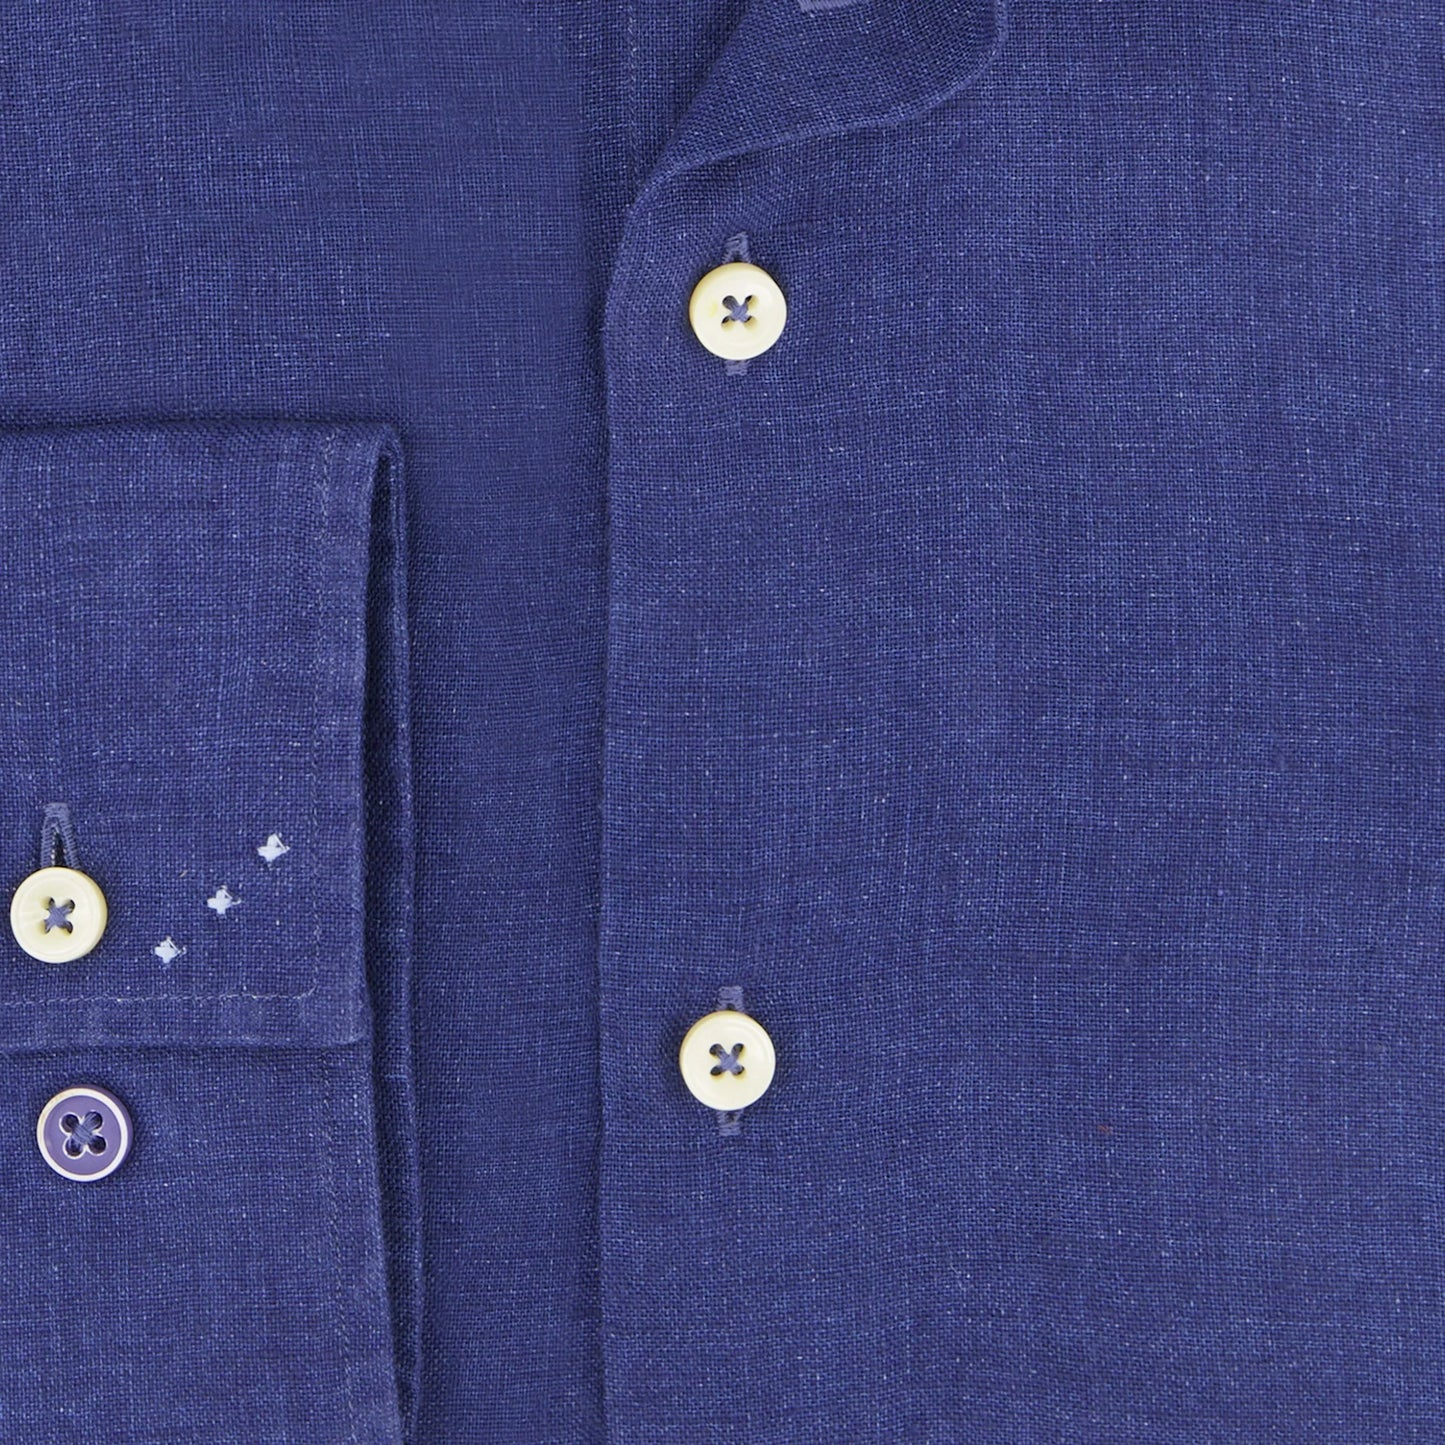 Linen shirt in navy by R2